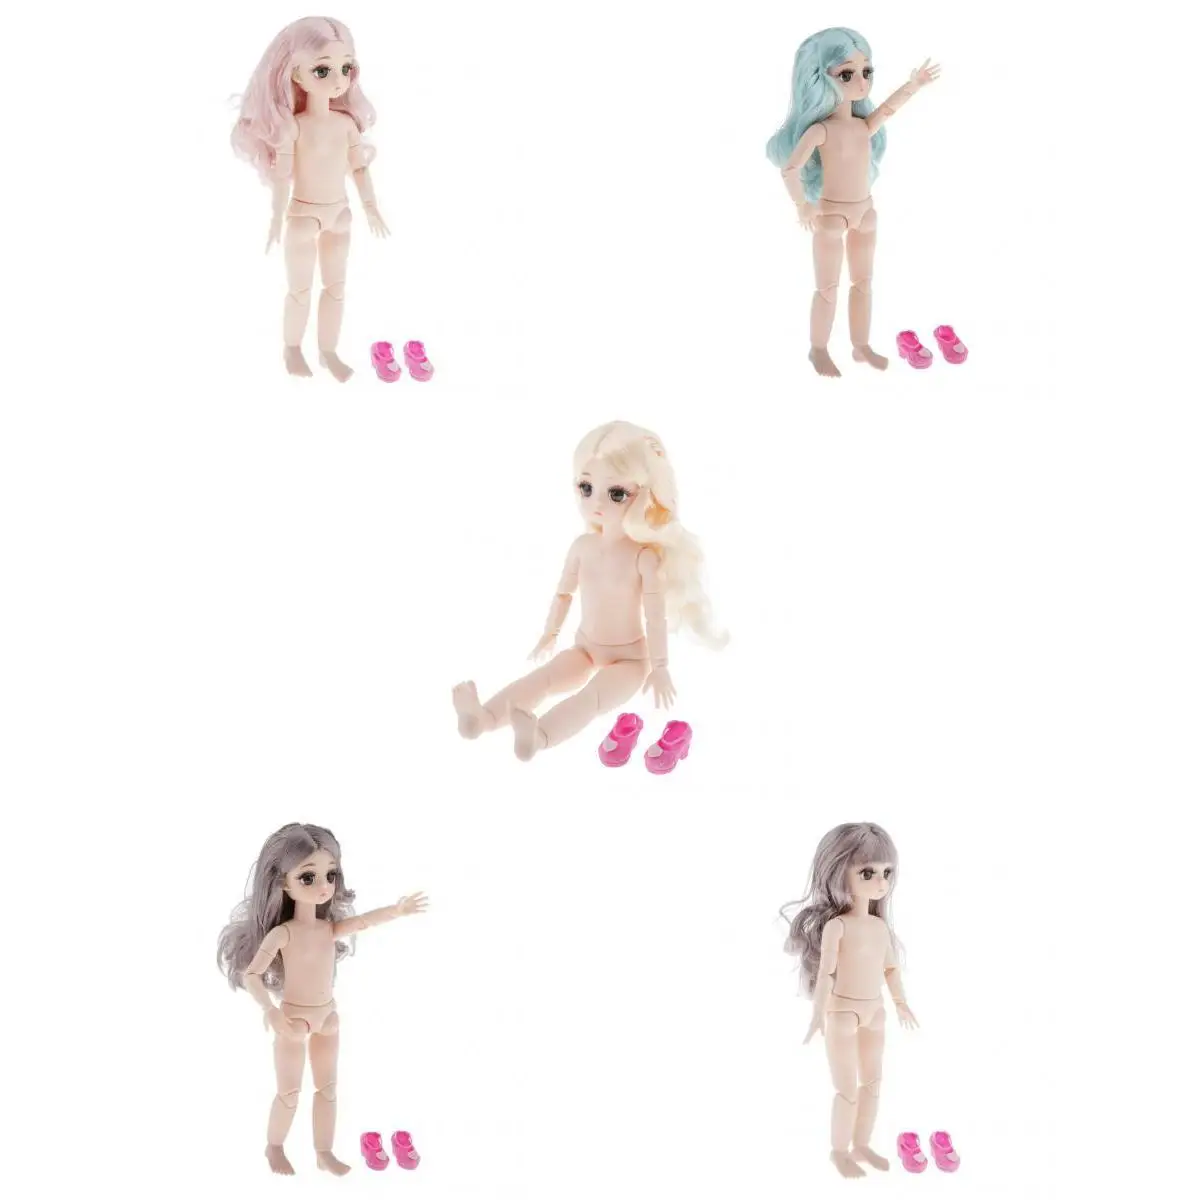 

5Pcs 21 Mobile 28cm BJD Girl Doll Body With Hair And Shoes Normal Skin